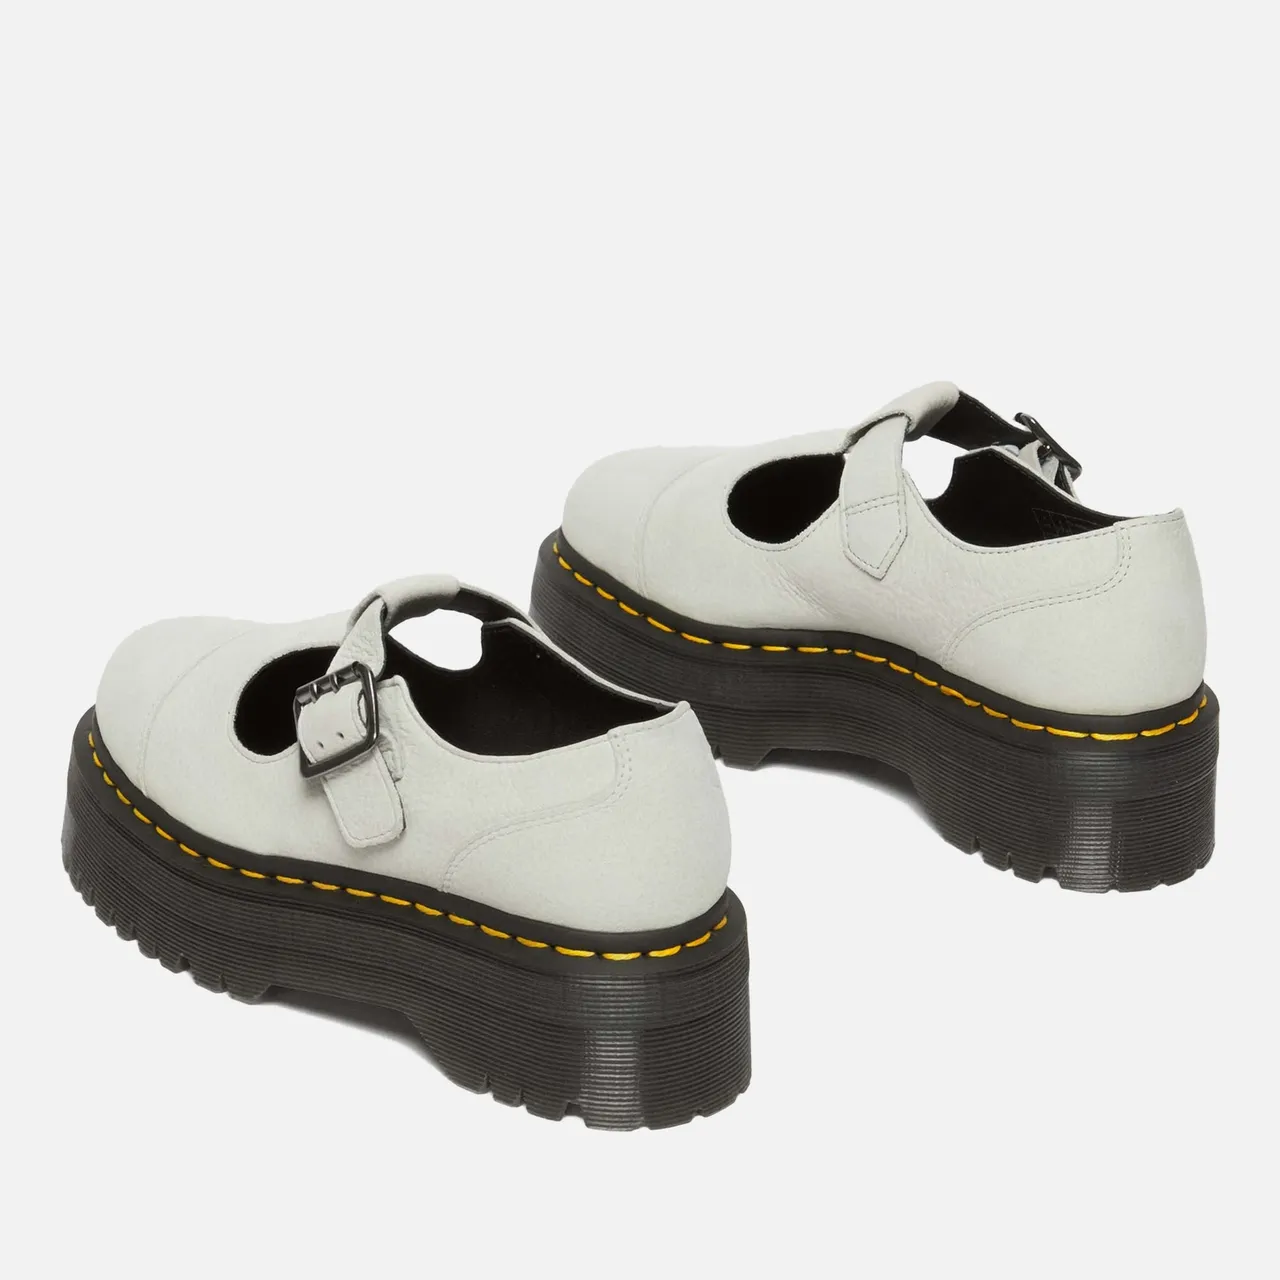 Dr. Martens Women's Bethan Leather Mary-Jane Shoes - UK